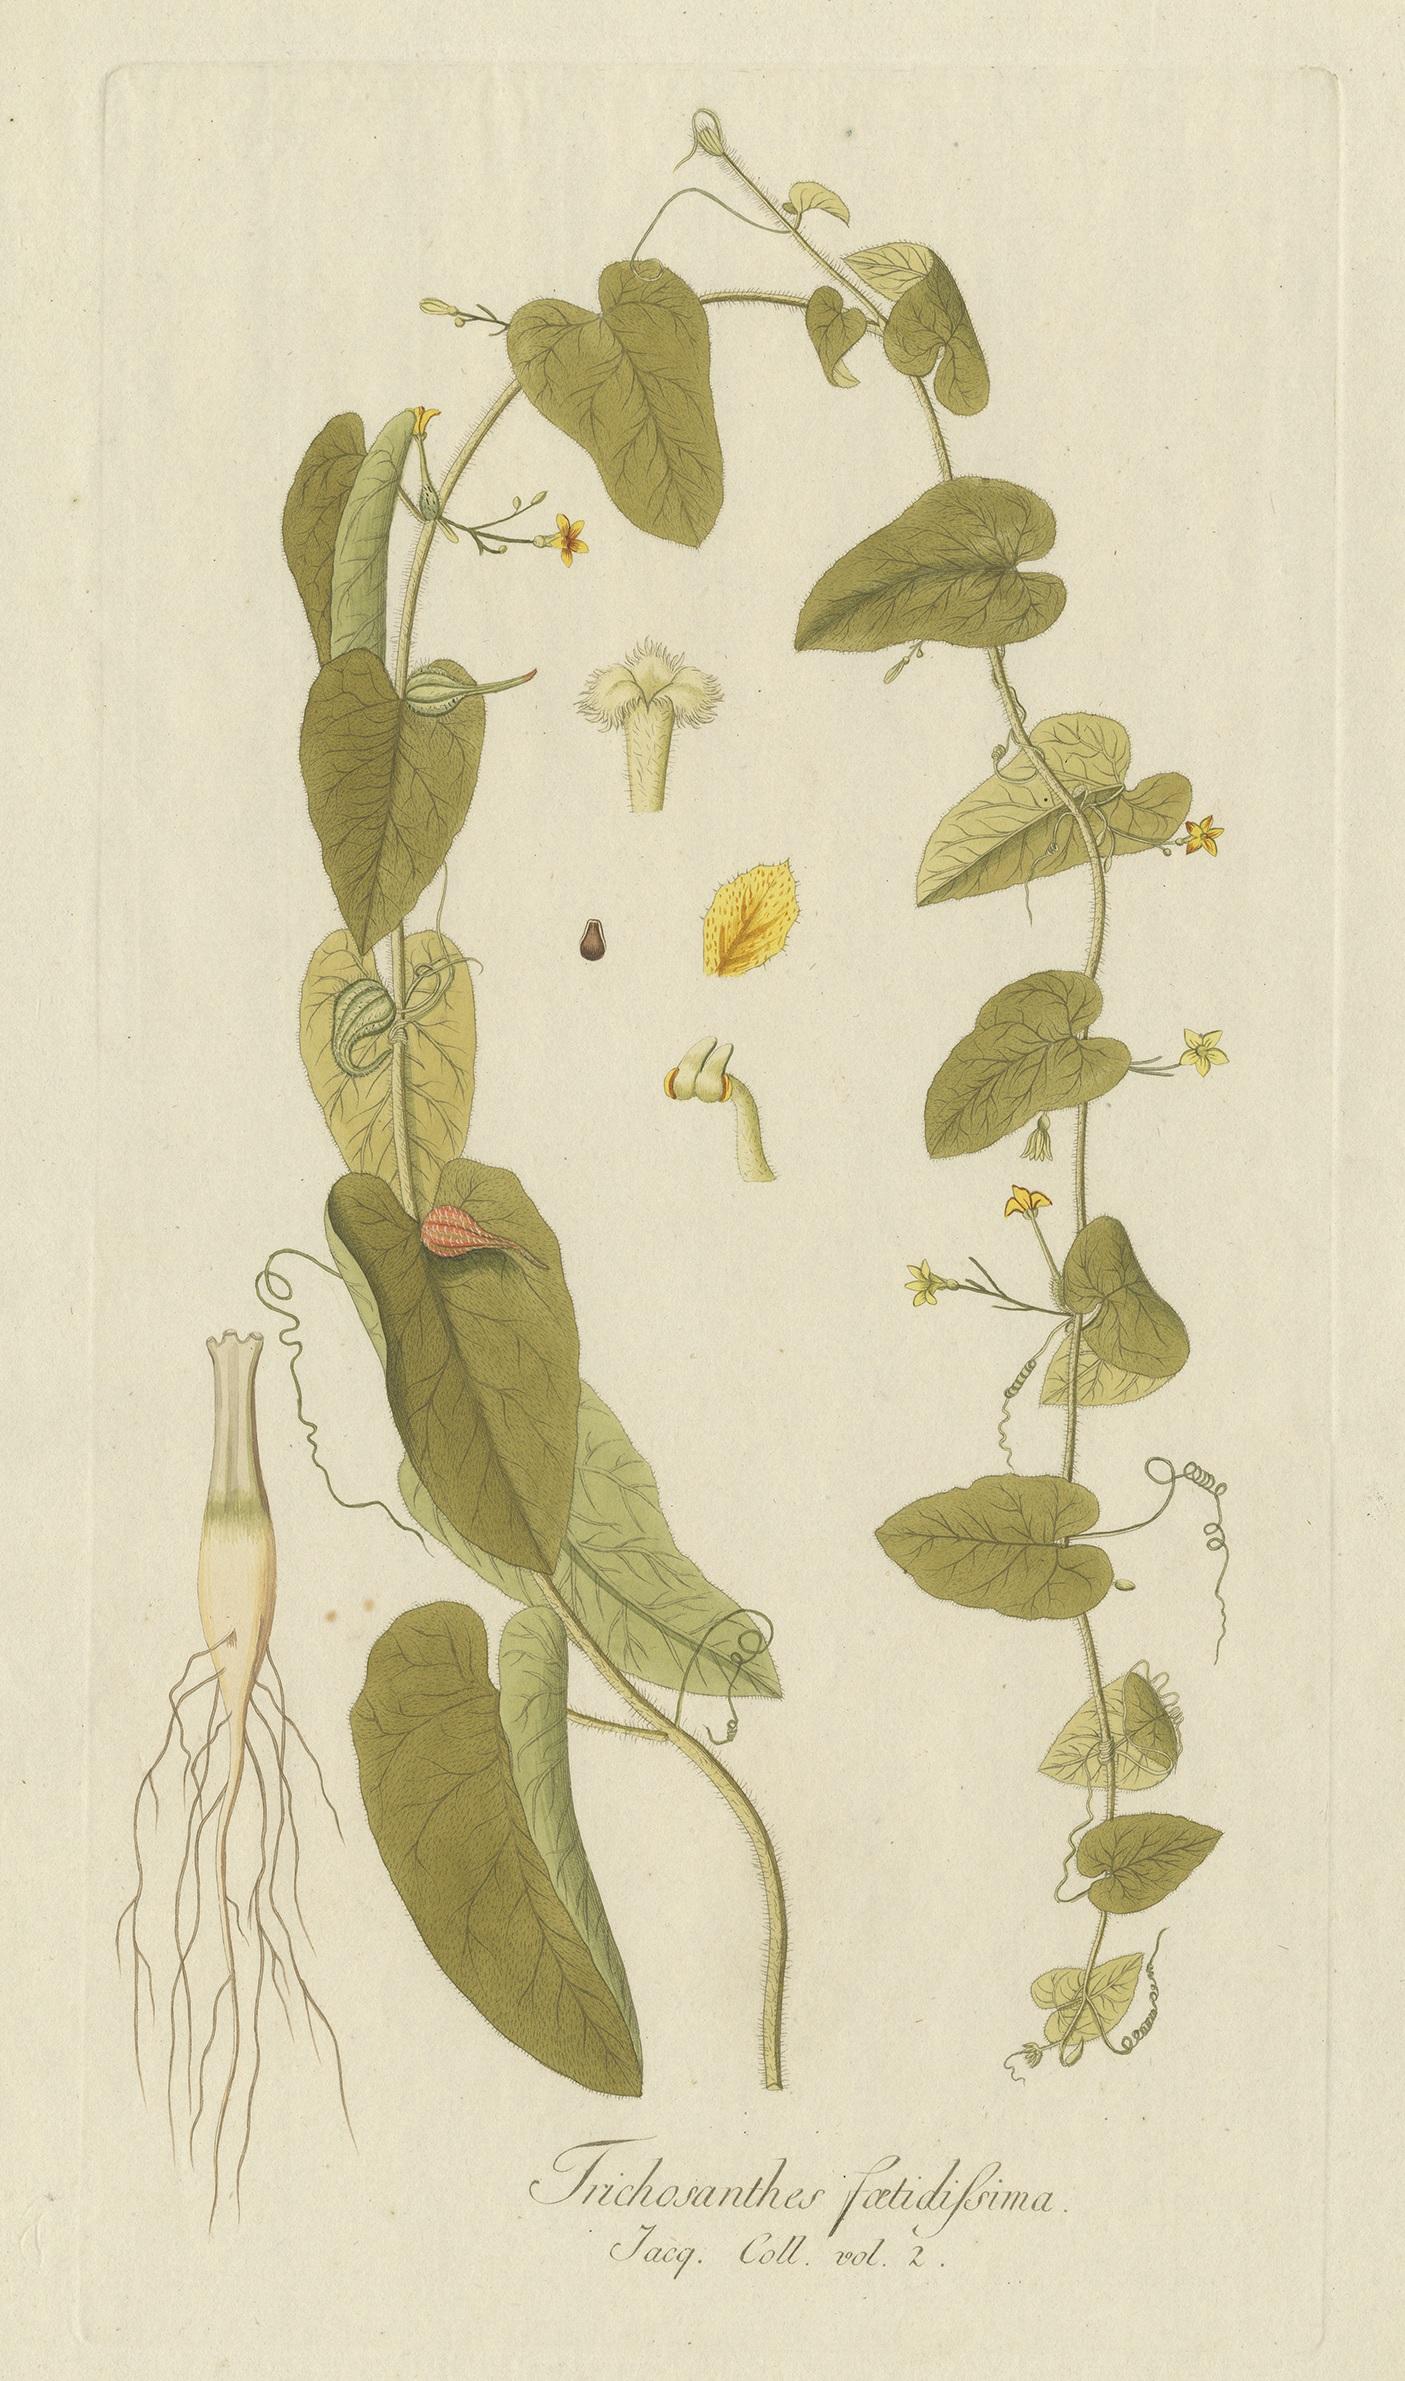 Antique botany print titled 'Trichosanthes Foetidissima'. Hand colored engraving of a trichosanthes species, a genus of tropical and subtropical vines. This print originates from 'Icones plantarum rariorum' by N.J. von Jacquin.